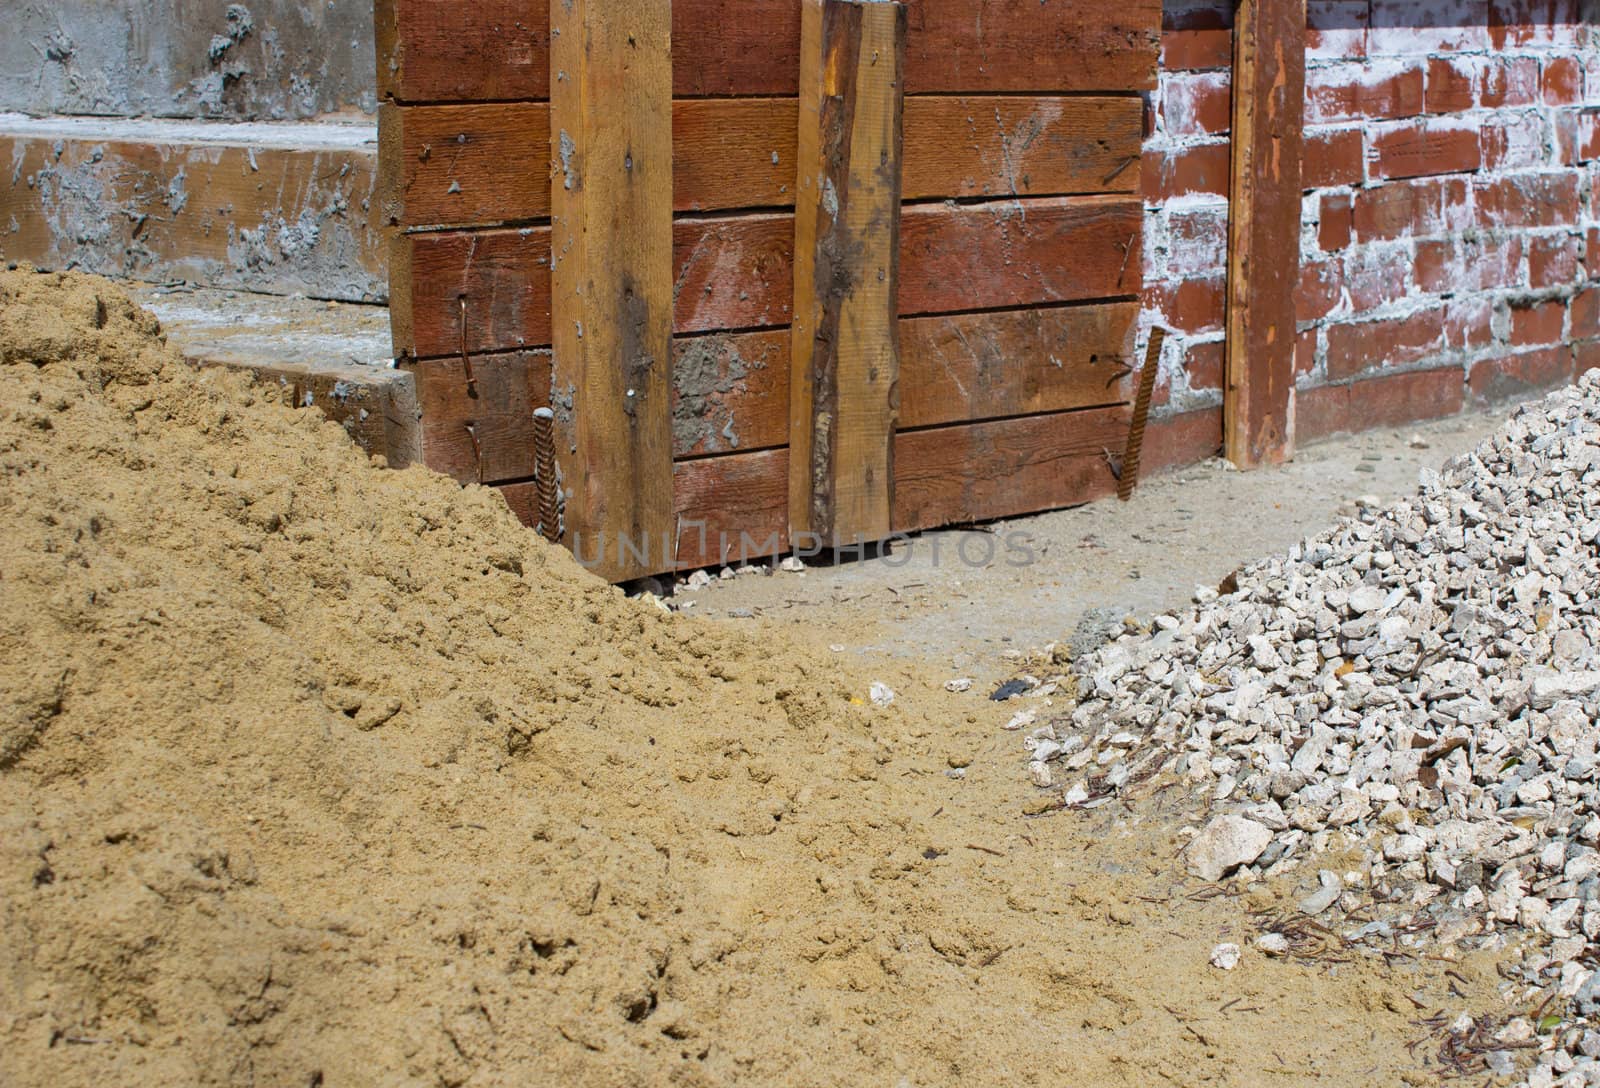 Piles of sand and gravel near a brick wall on a construction site
